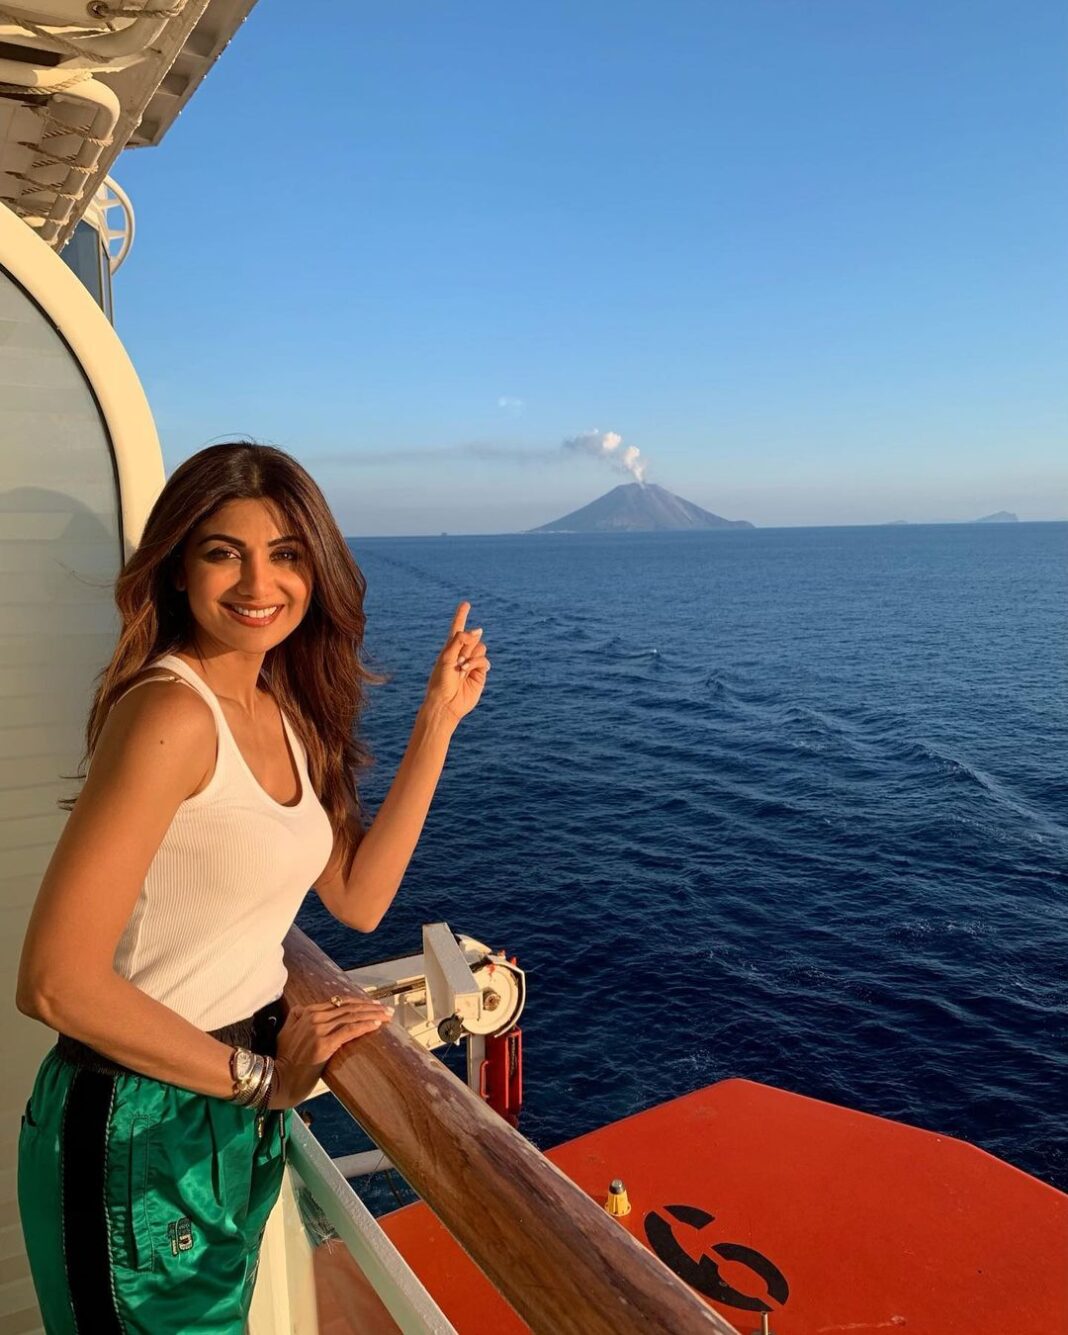 Shilpa Shetty Instagram - How many times can you say “I passed by a live /active Volcano!” I did.. Passed Mount Vesuvius enroute to Naples..😍😎 #mountvesuvious #italy #cruising #volcano #livevolcano #beauty #nature